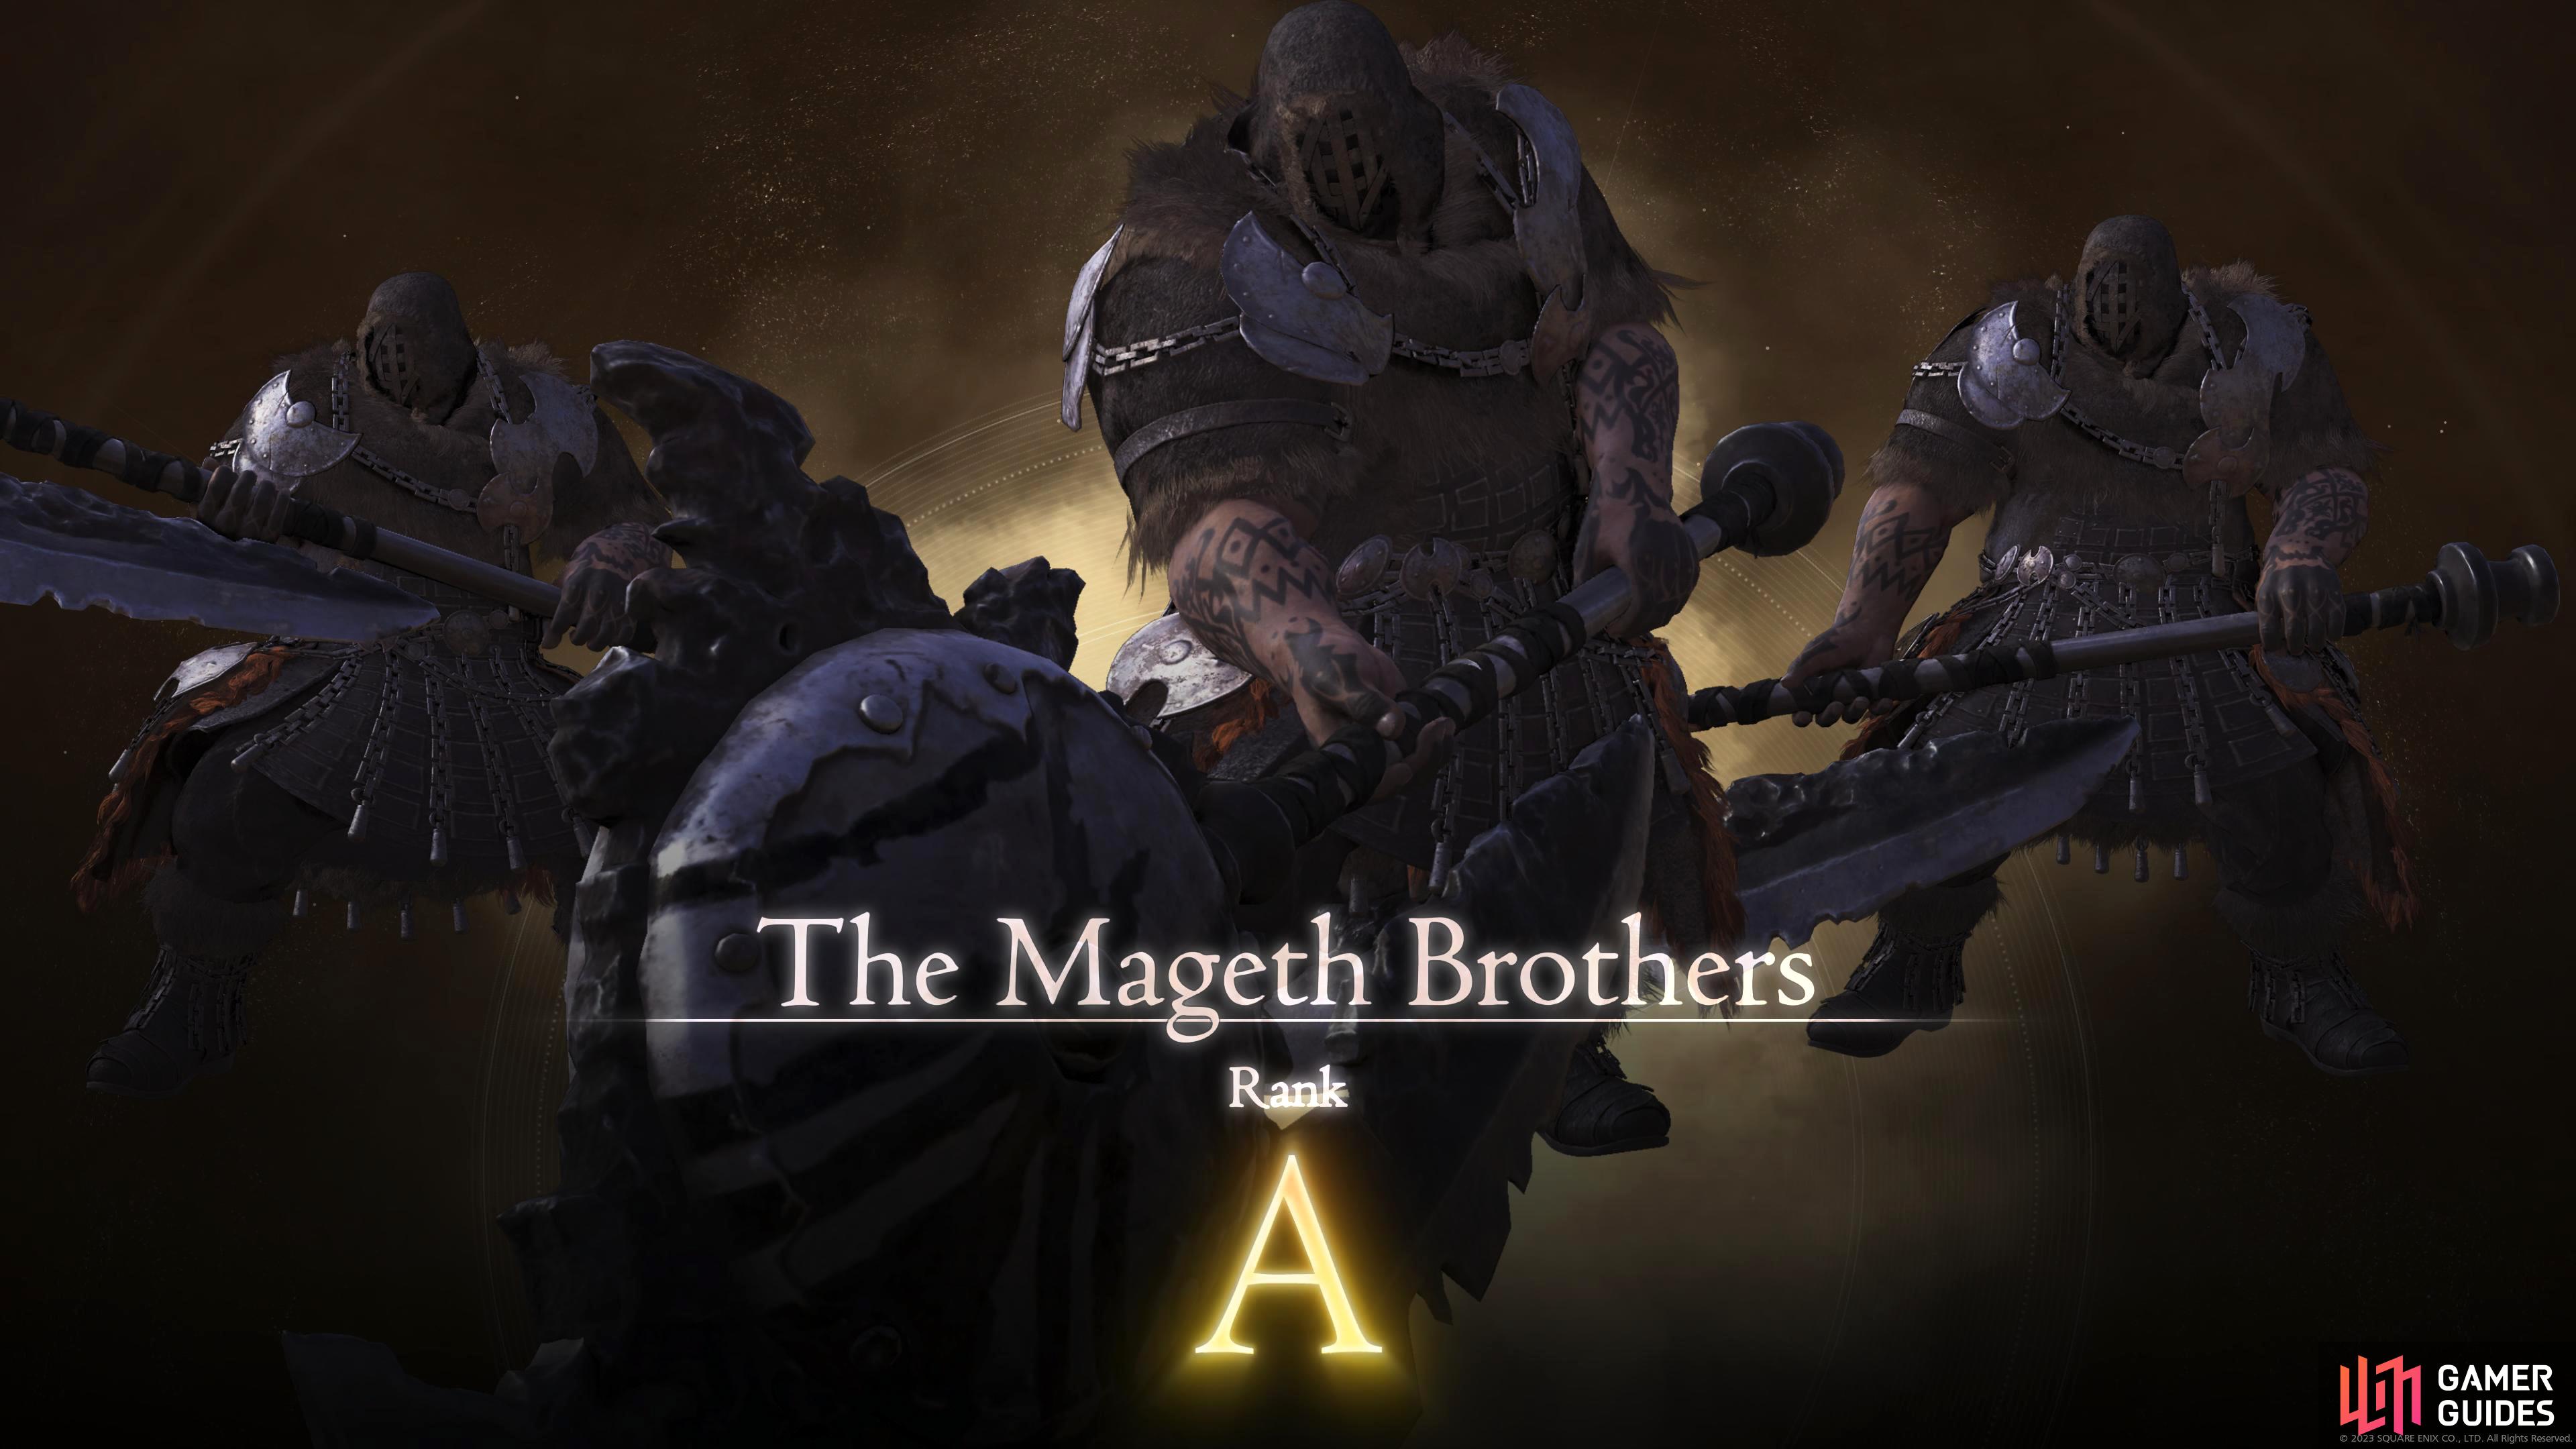 The Mageth Brothers Hunt can be accessed during the Things Fall Apart main scenario quest.